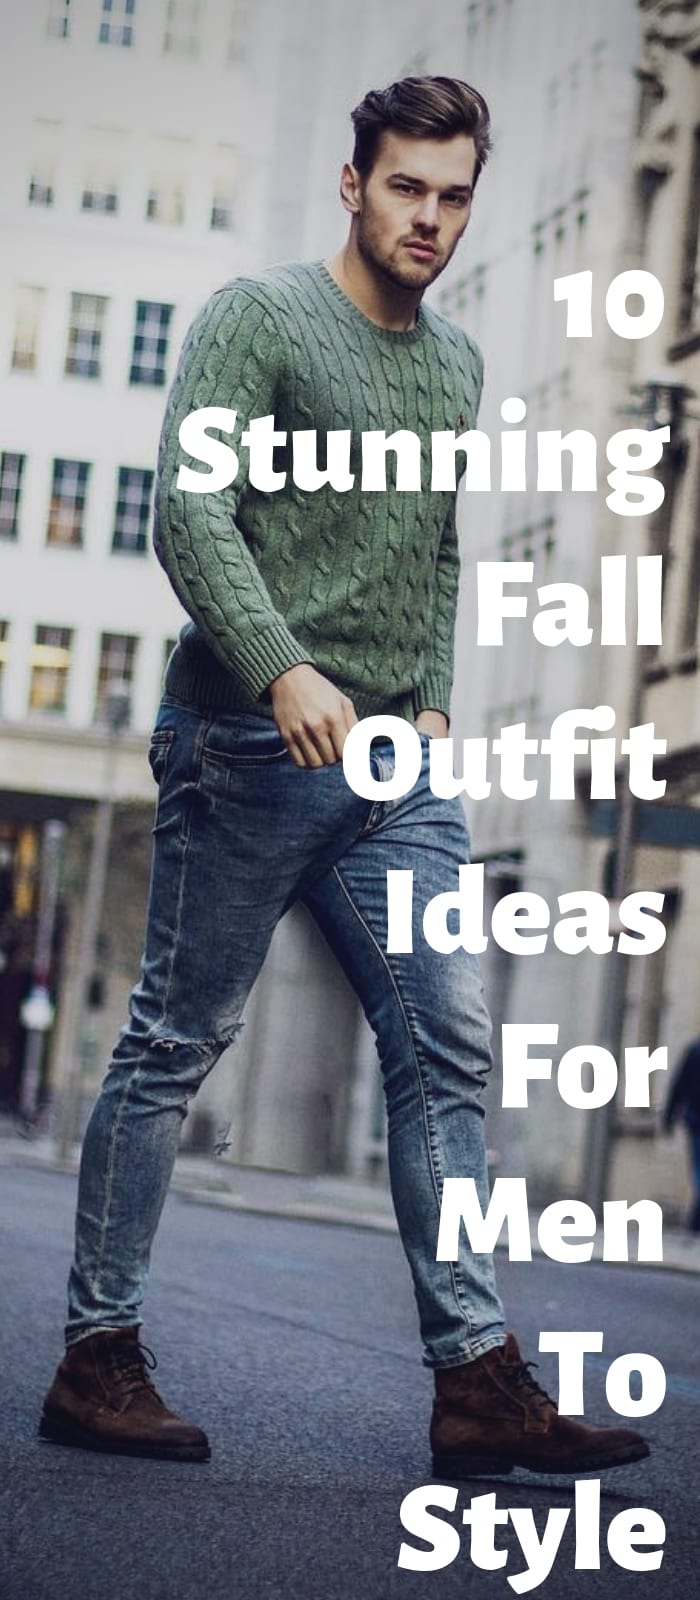 10 Latest Fall Outfit Ideas For Men This Year!